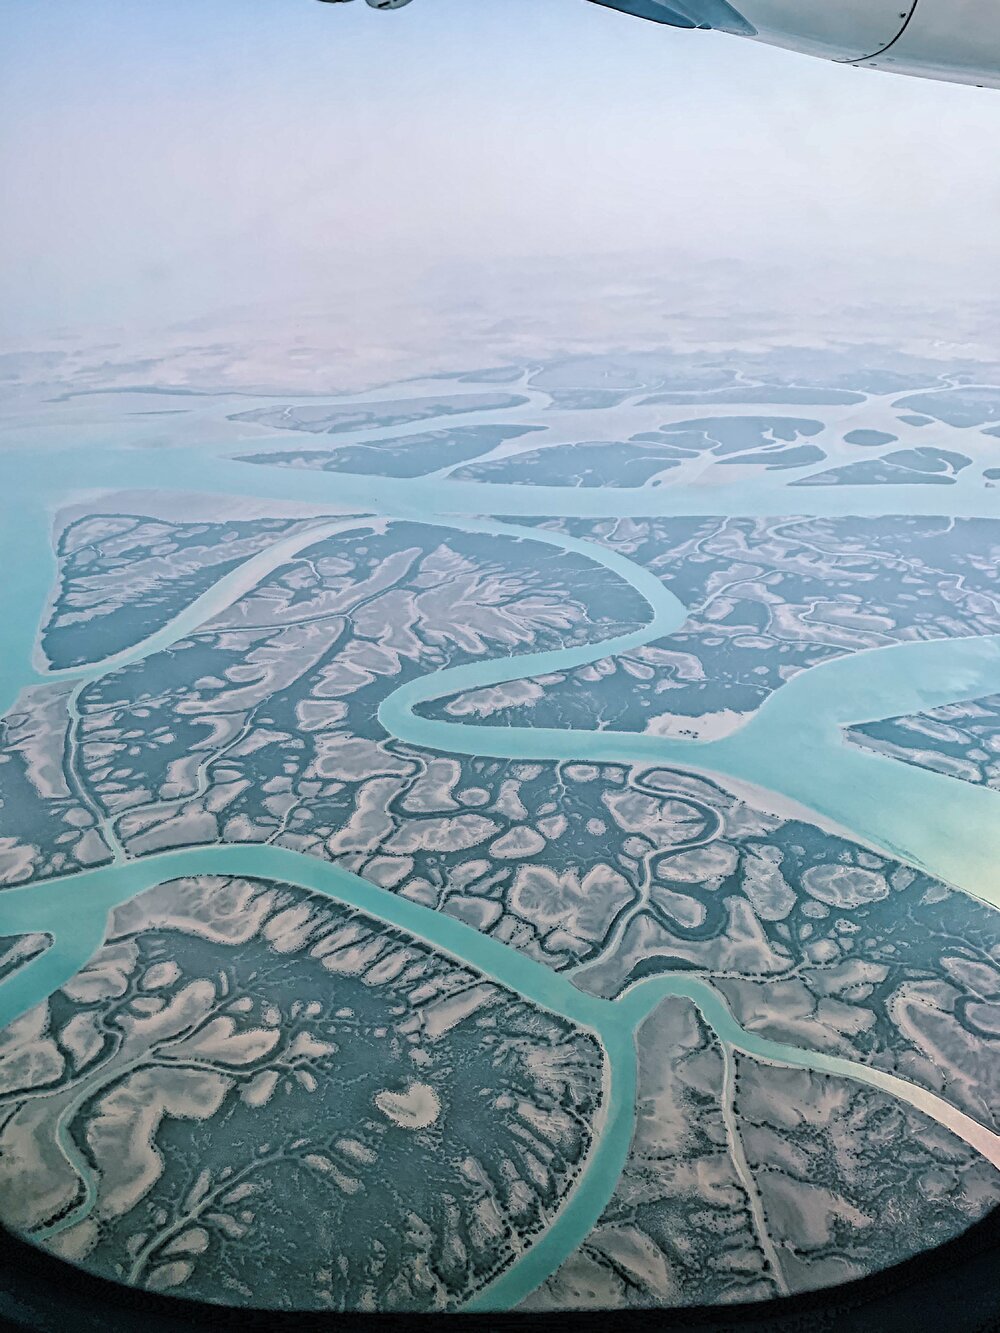 The view of Qeshm island mangrove from 5km up above.